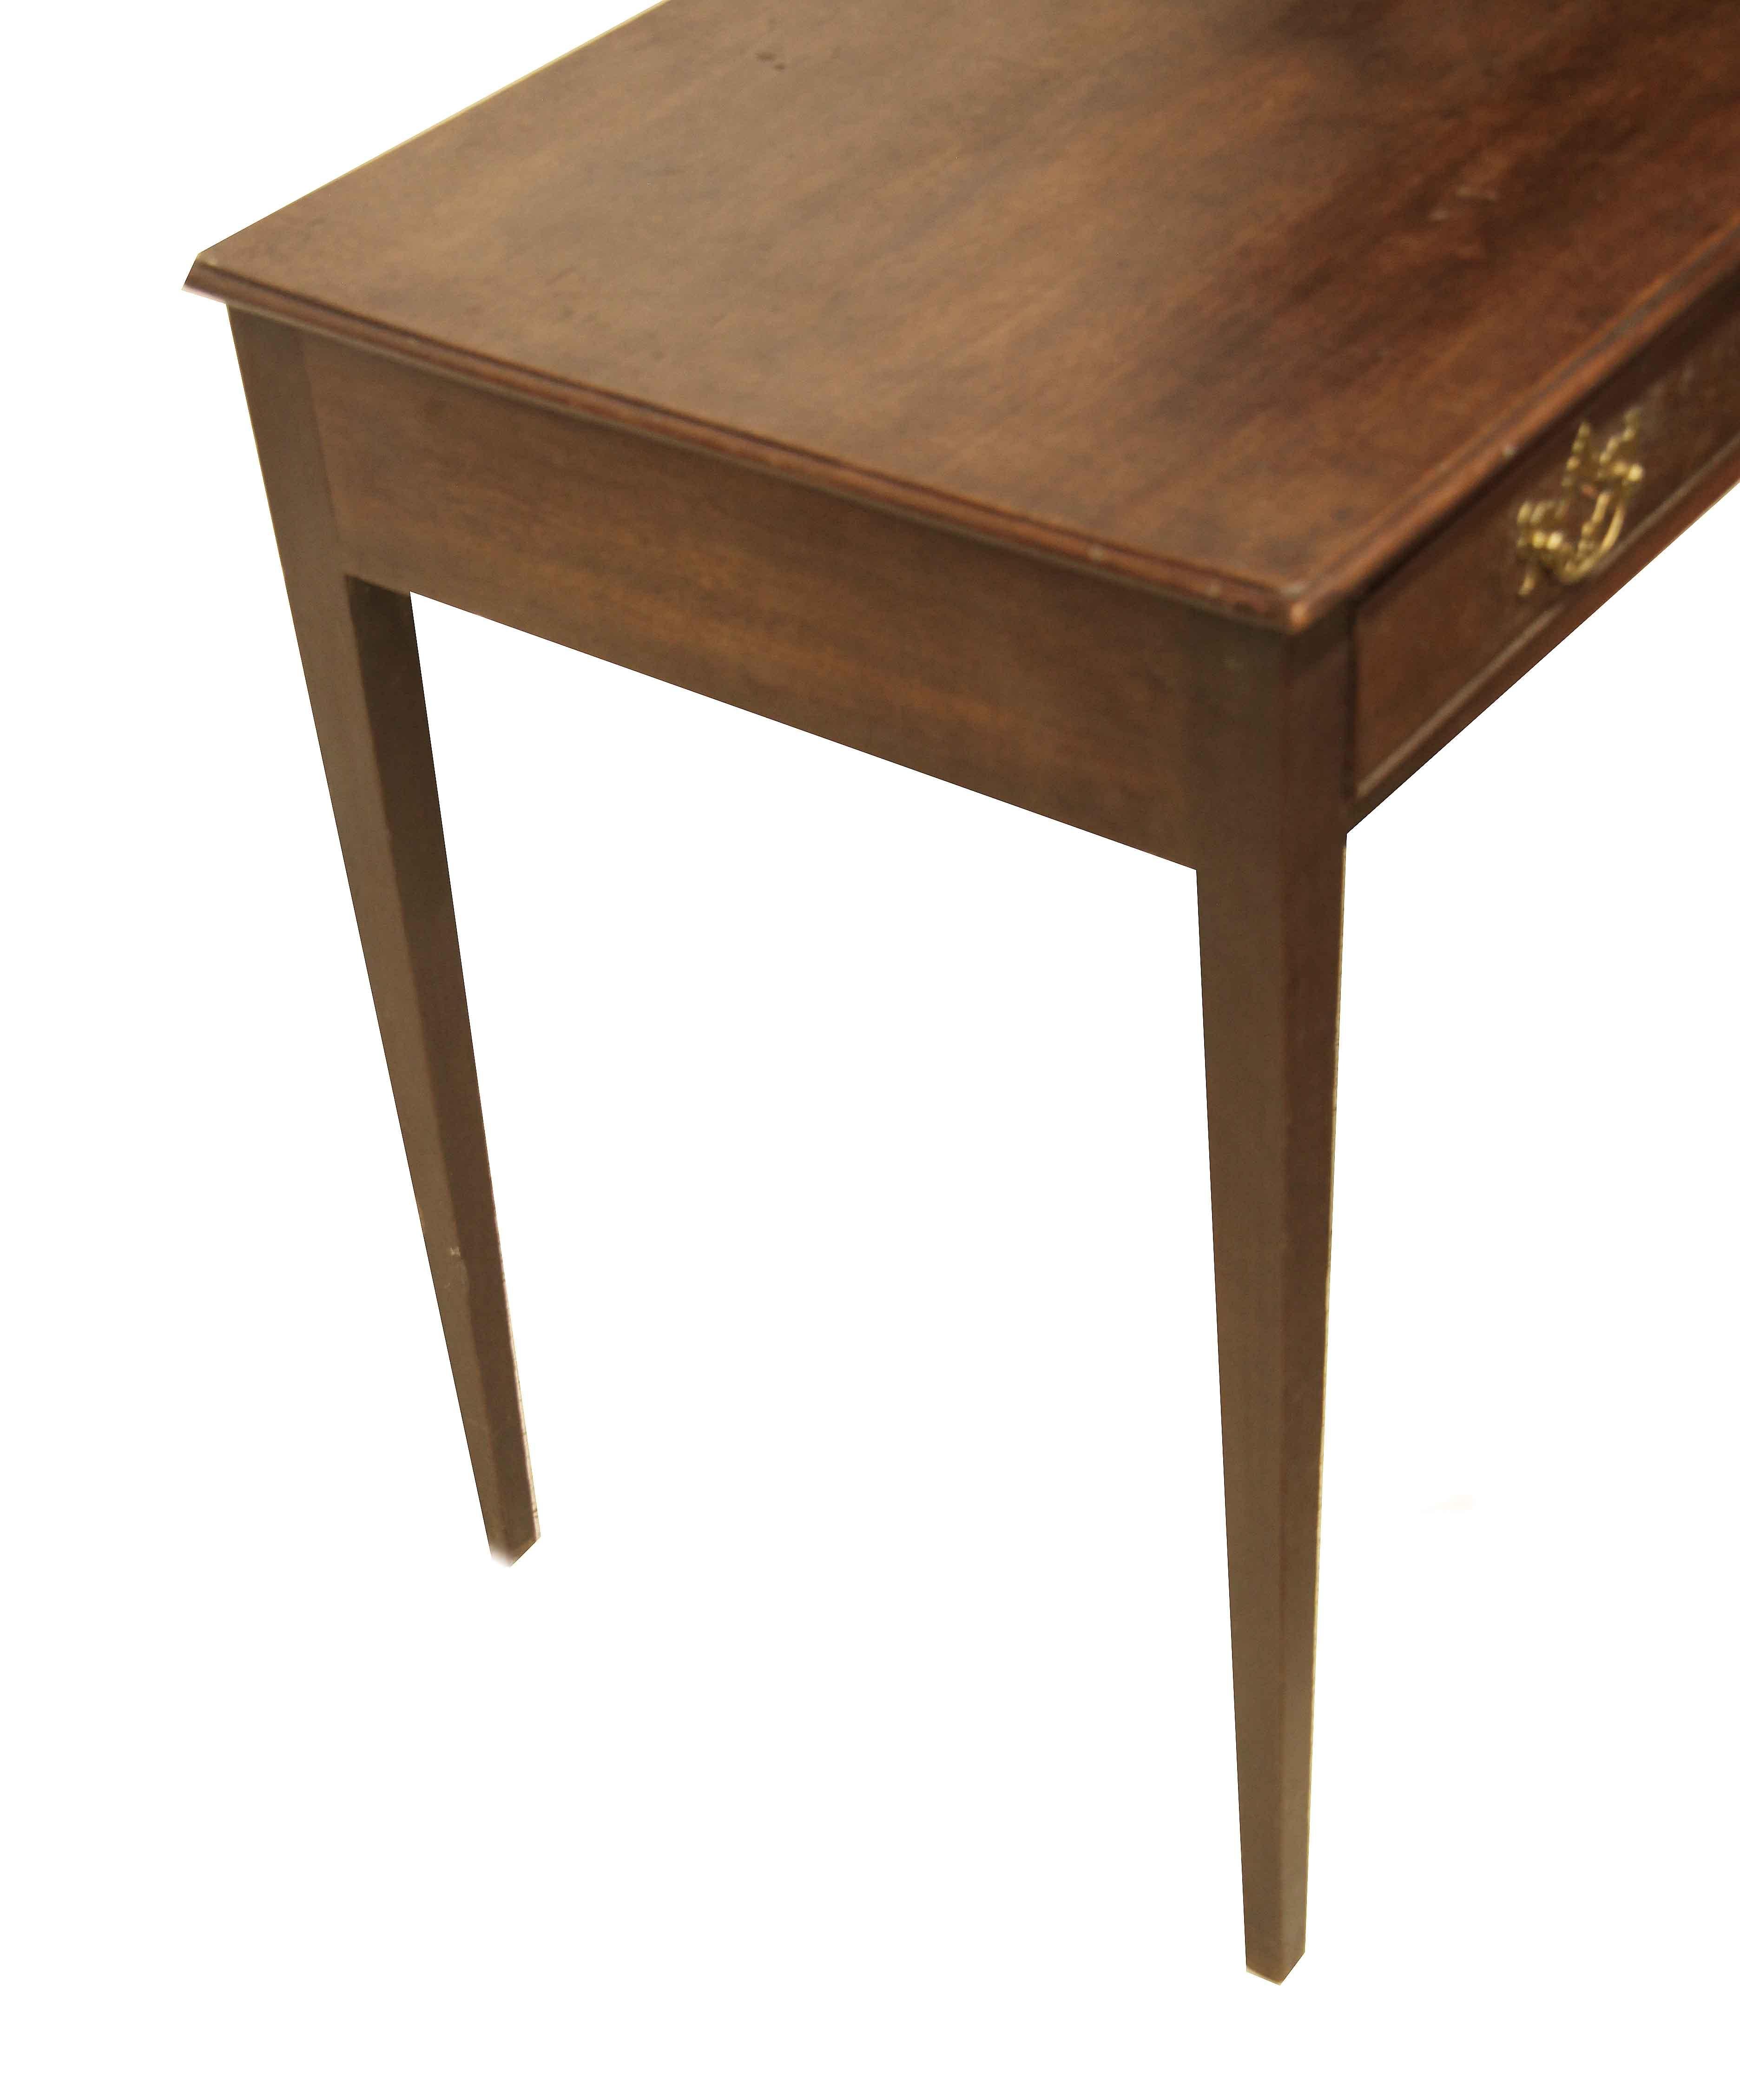 George III side table,  this mahogany table has a warm original patina, the top with molded edge( not applied), the single drawer has open work brass pulls and matching escutcheon and oak secondary wood.  The legs are nicely tapered.